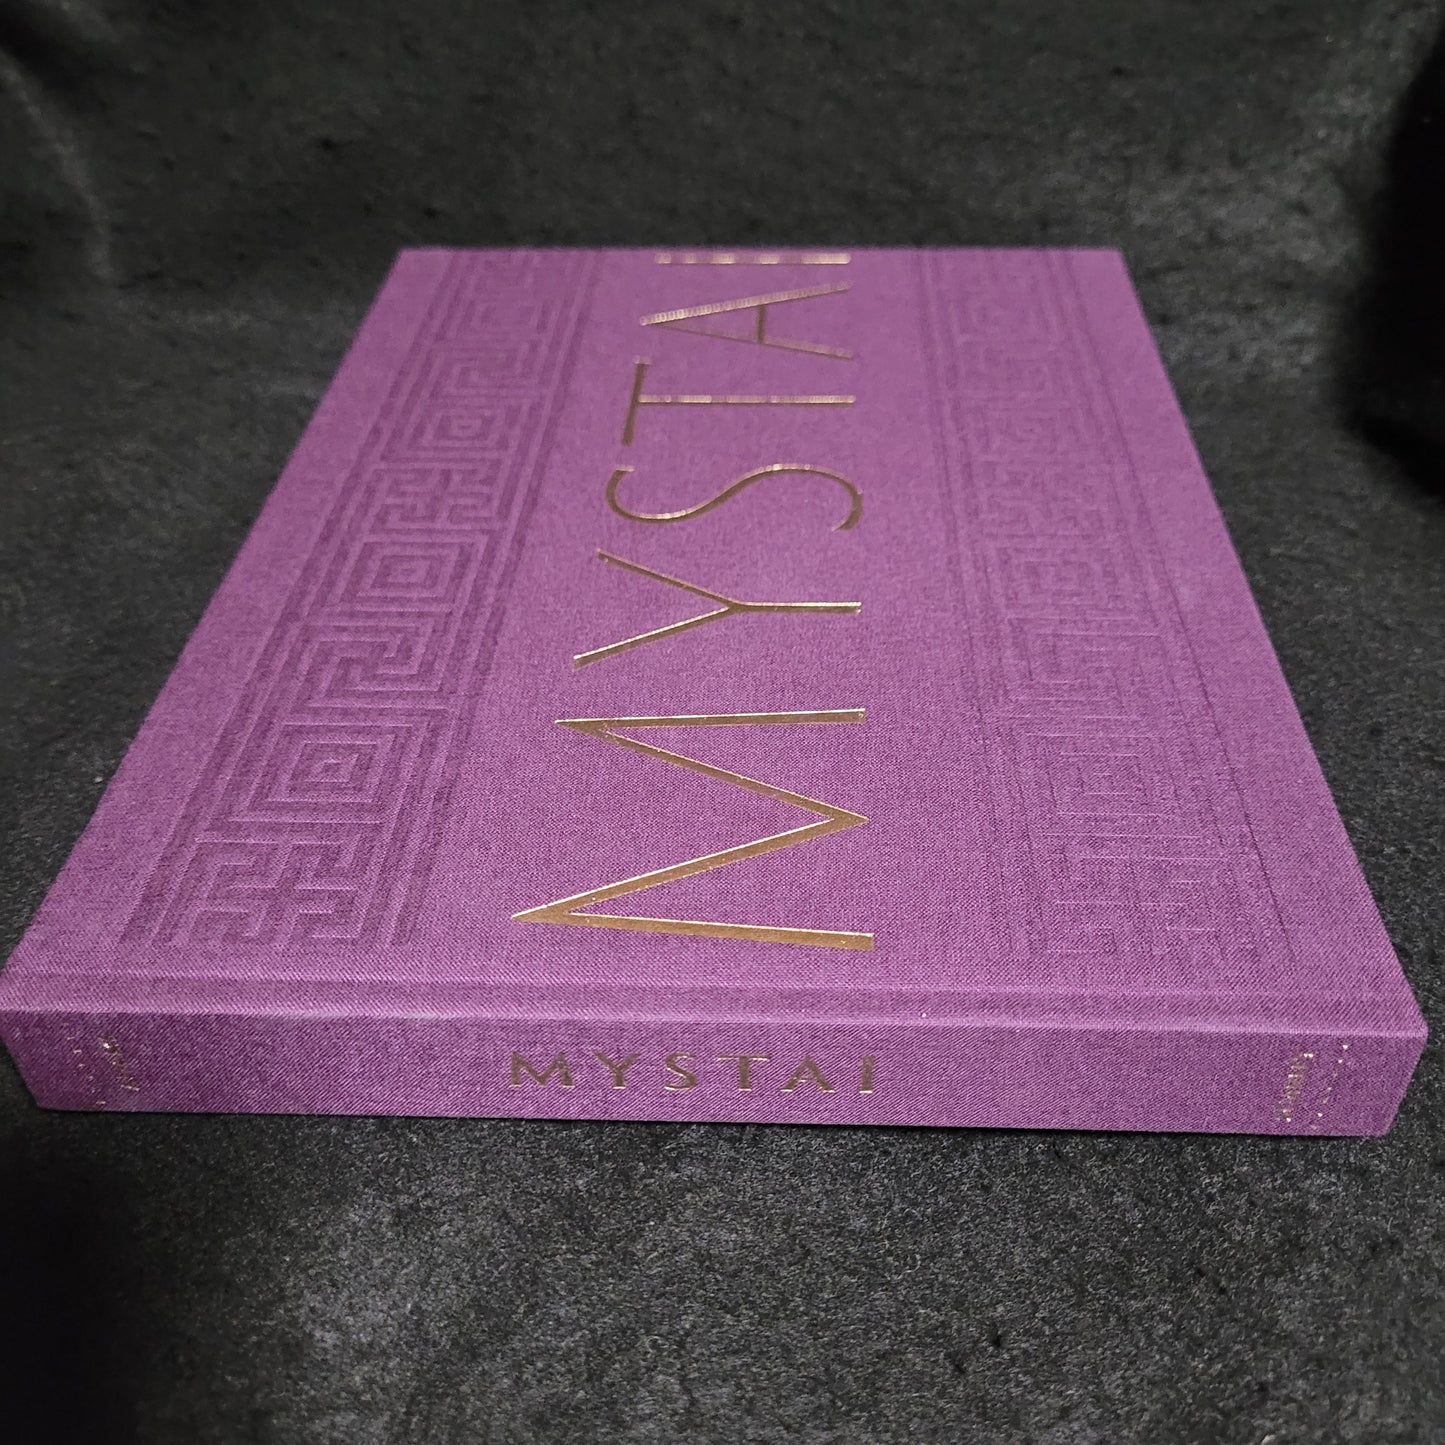 Mystai: Dancing Out the Mysteries of Dionysos by Peter Mark Adams (Scarlet Imprint, 2019) Purple Cloth Hardback Edition